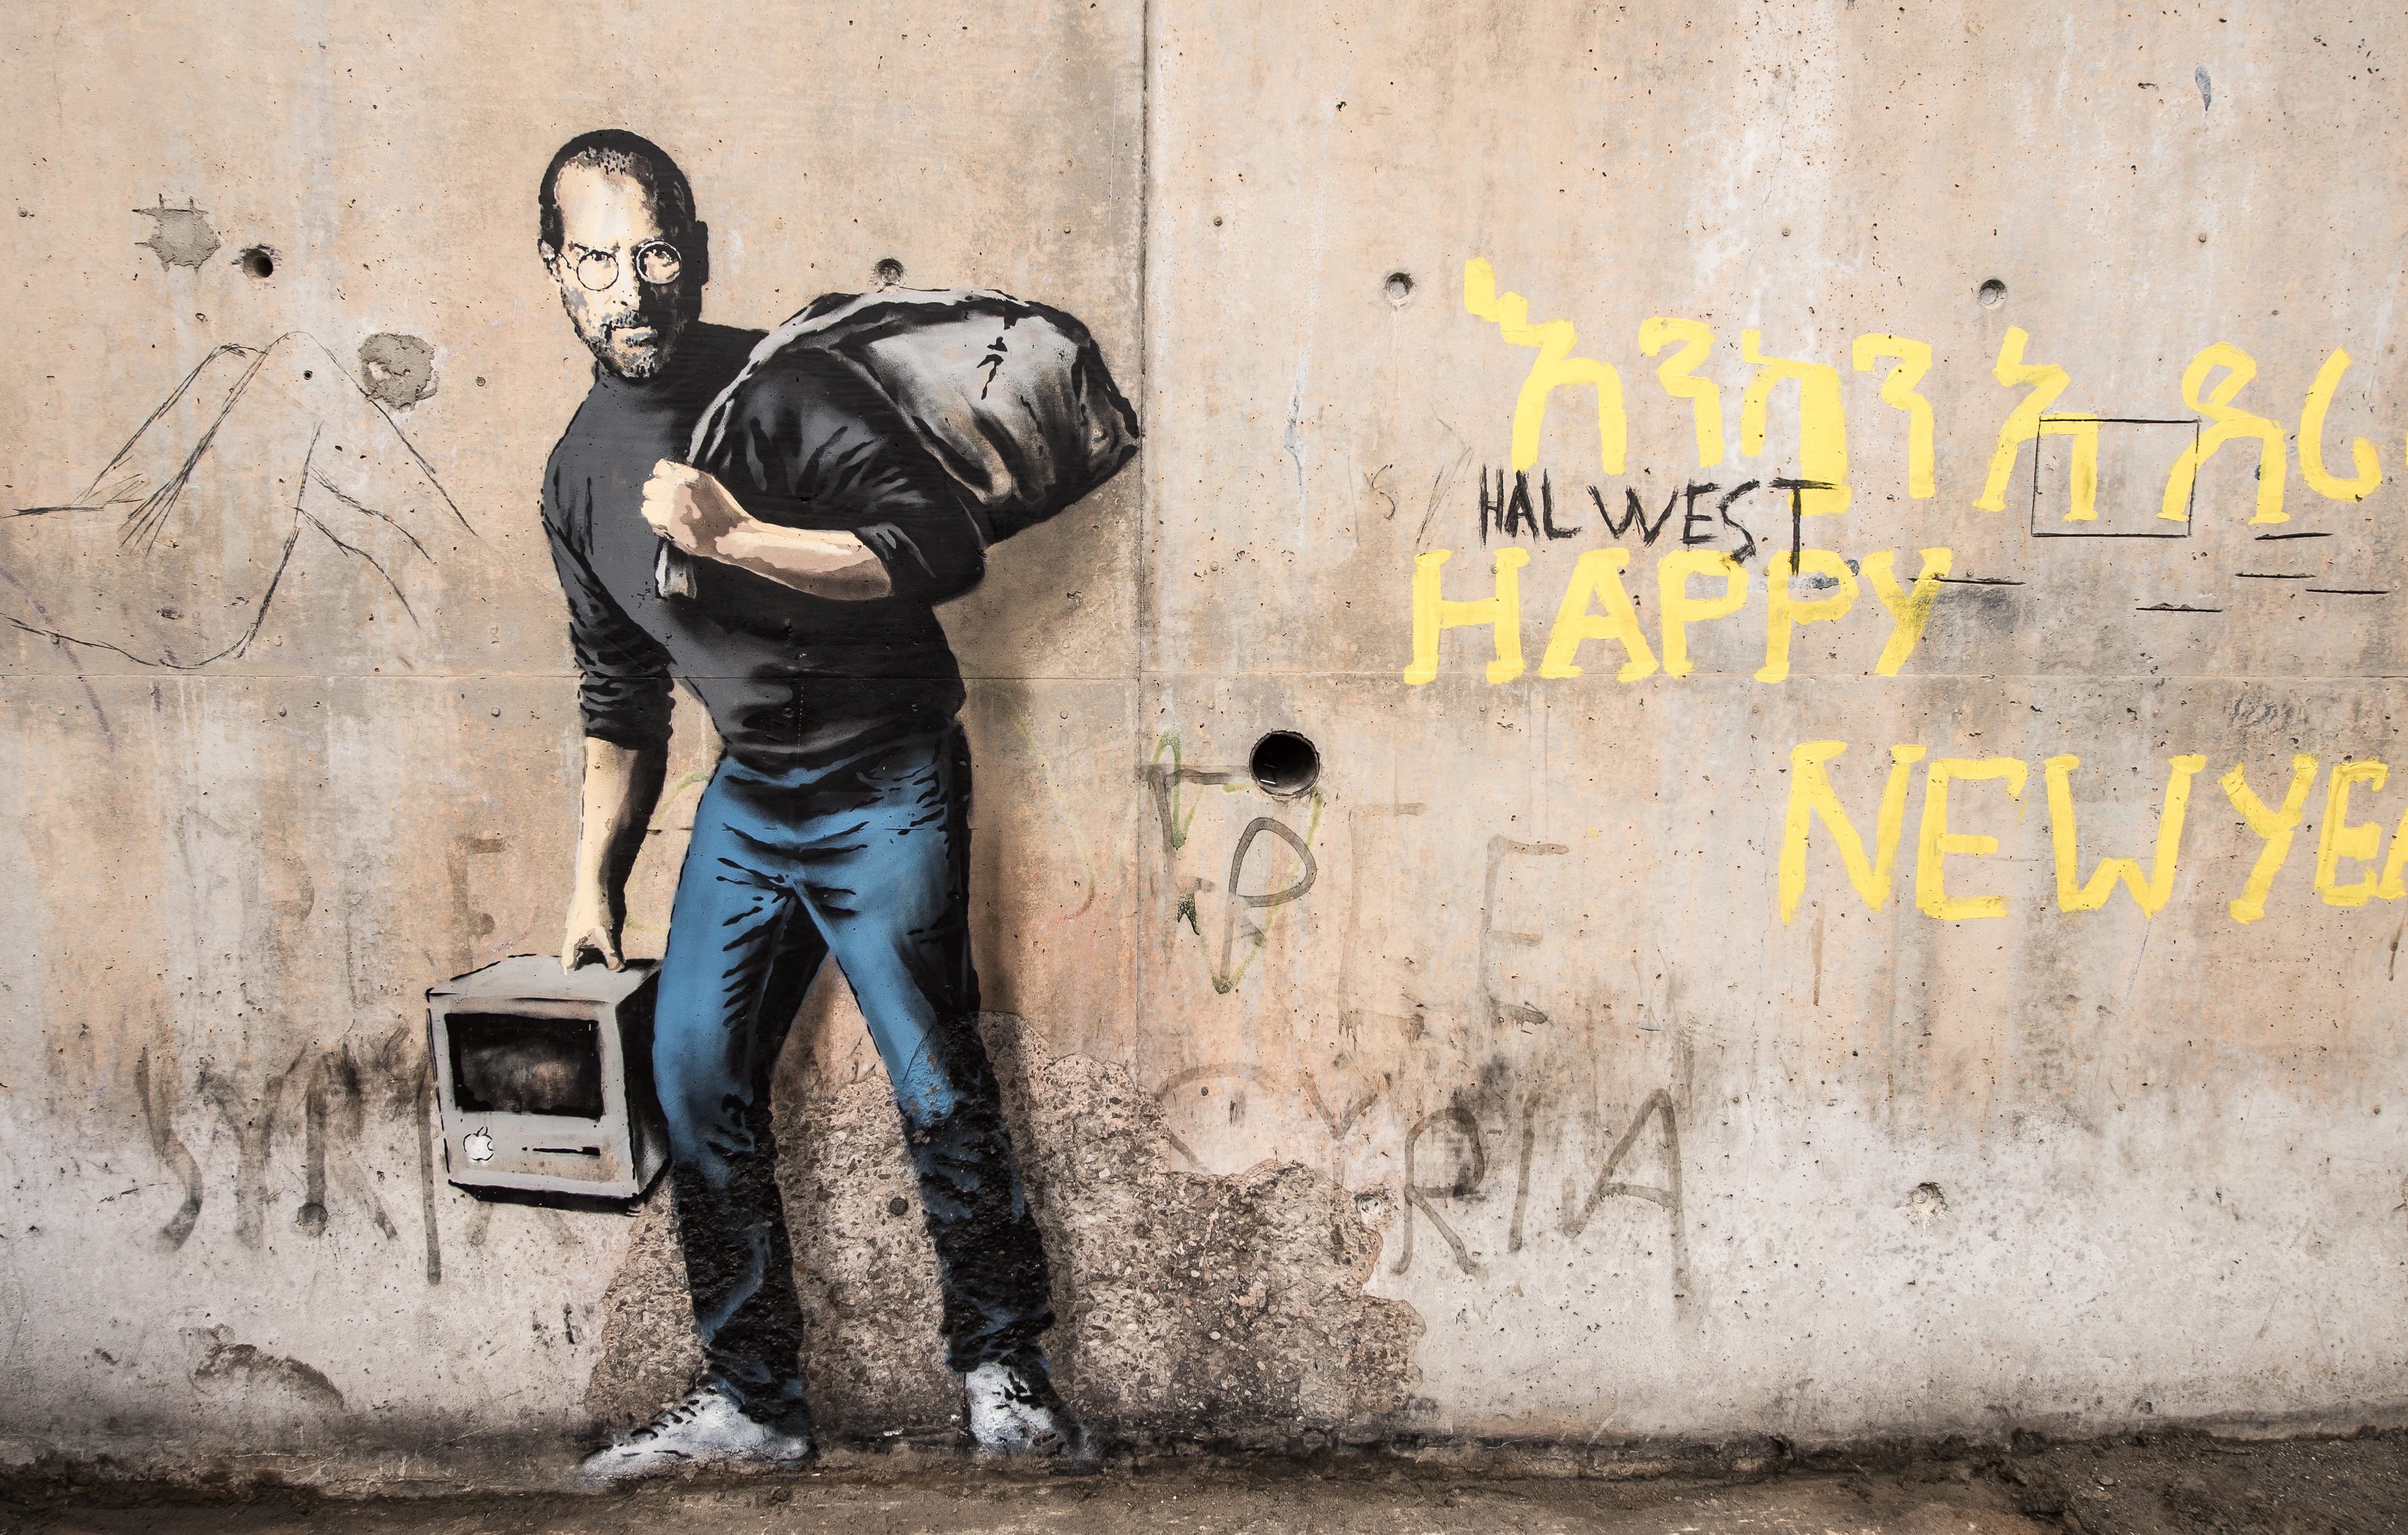 This picture taken on December 12, 2015 shows a street art graffiti representing Steve Jobs, founder and late CEO of Apple, by elusive British artist Banksy at the migrant camp known as the "Jungle" in Calais, northern France. (Philippe Huguen—AFP/Getty Images)